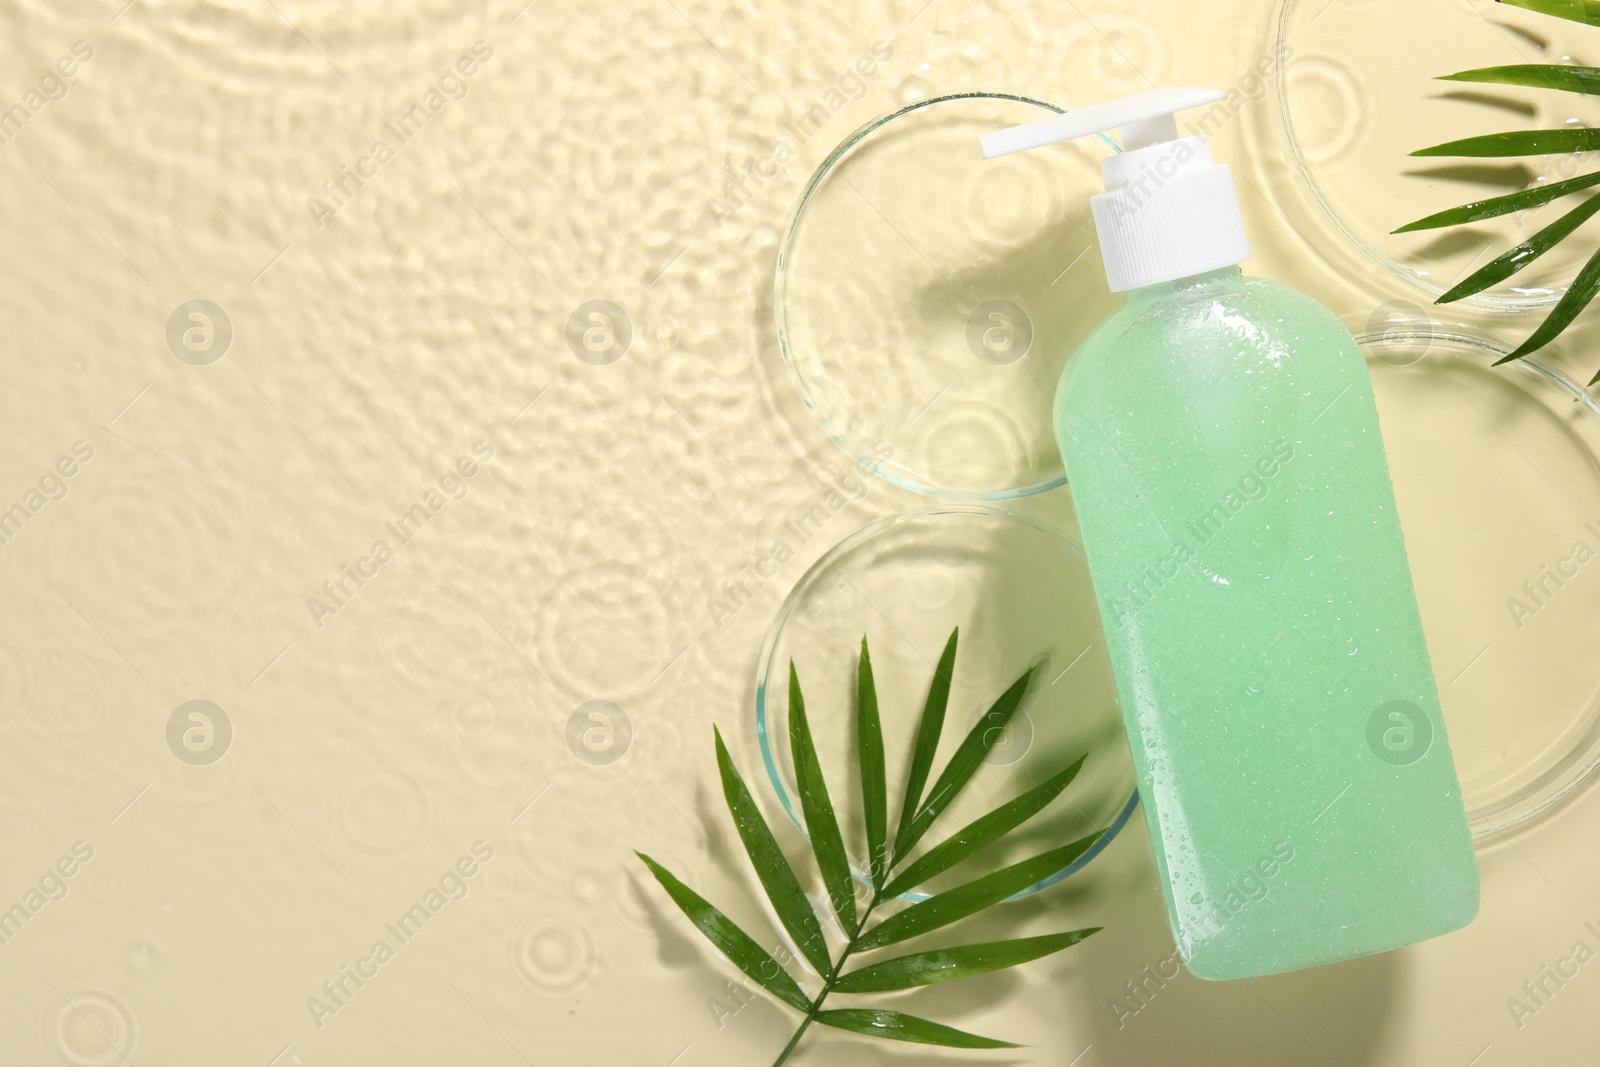 Photo of Bottle of face cleansing product, fresh leaves and petri dishes in water against beige background, flat lay. Space for text